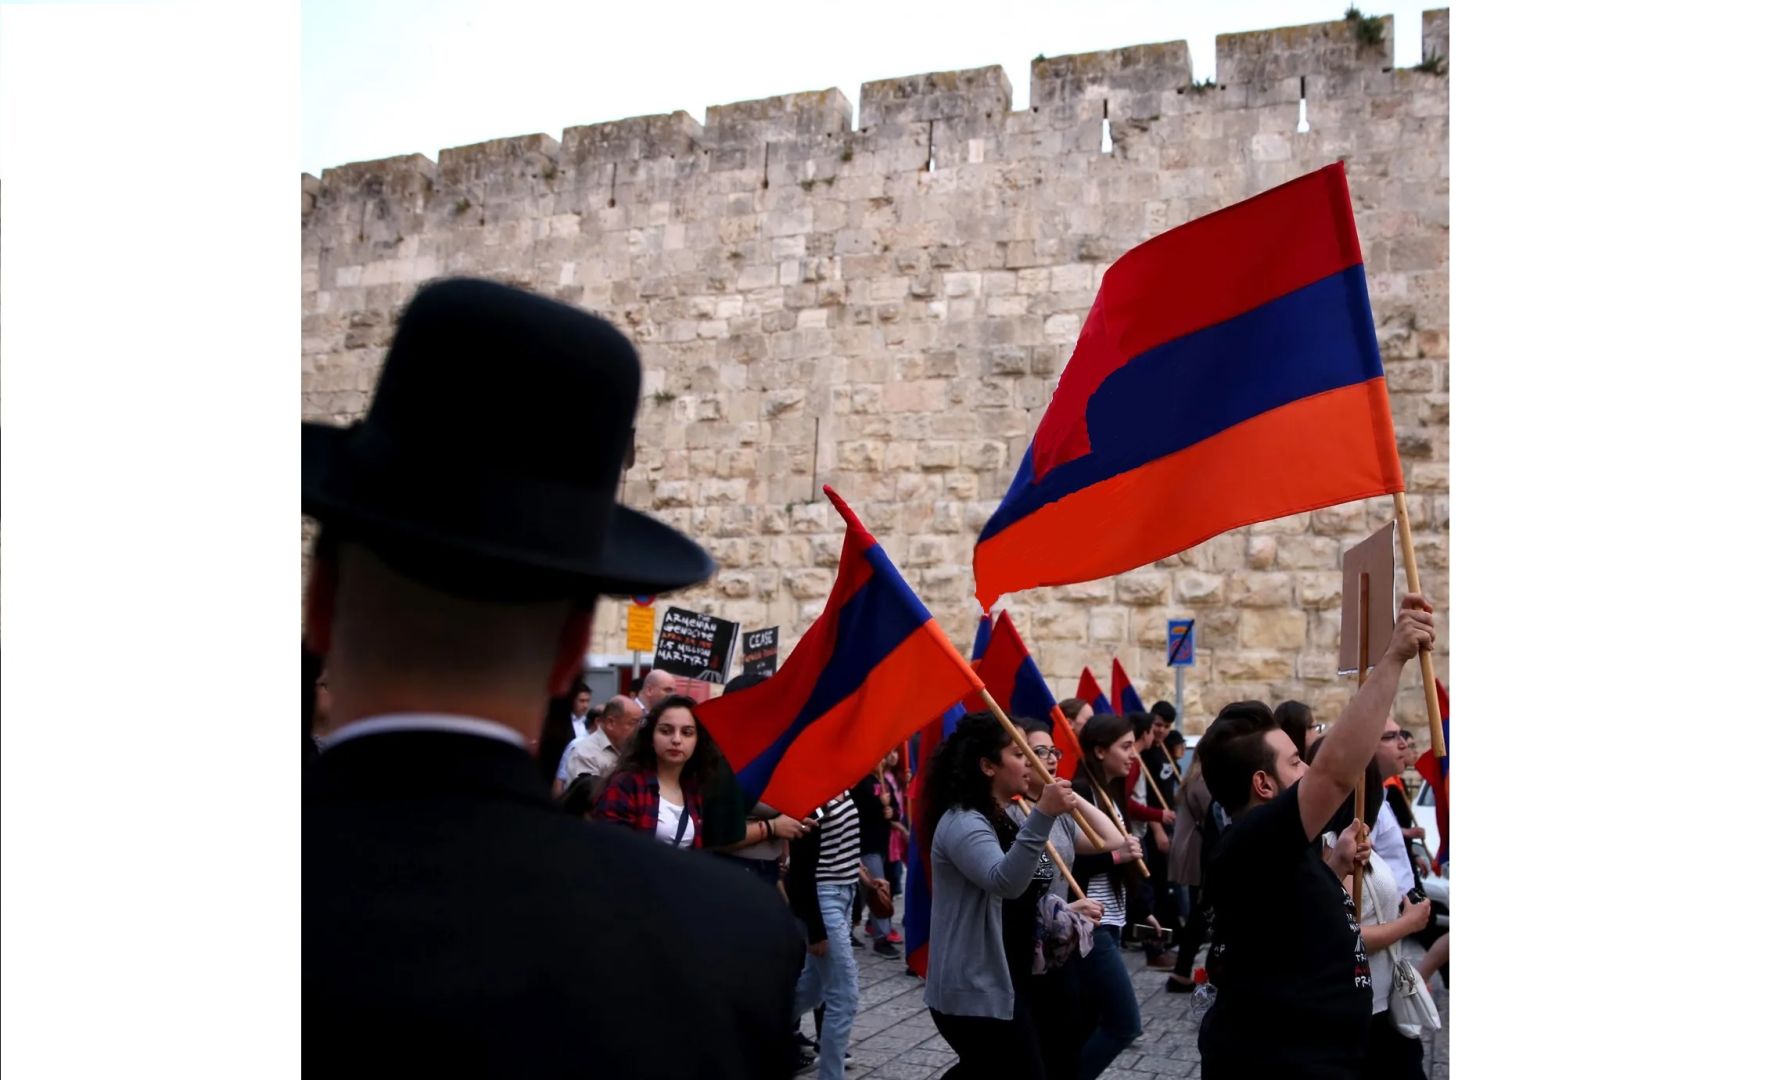 Armenia's policy conundrum in approach to its relations with Israel